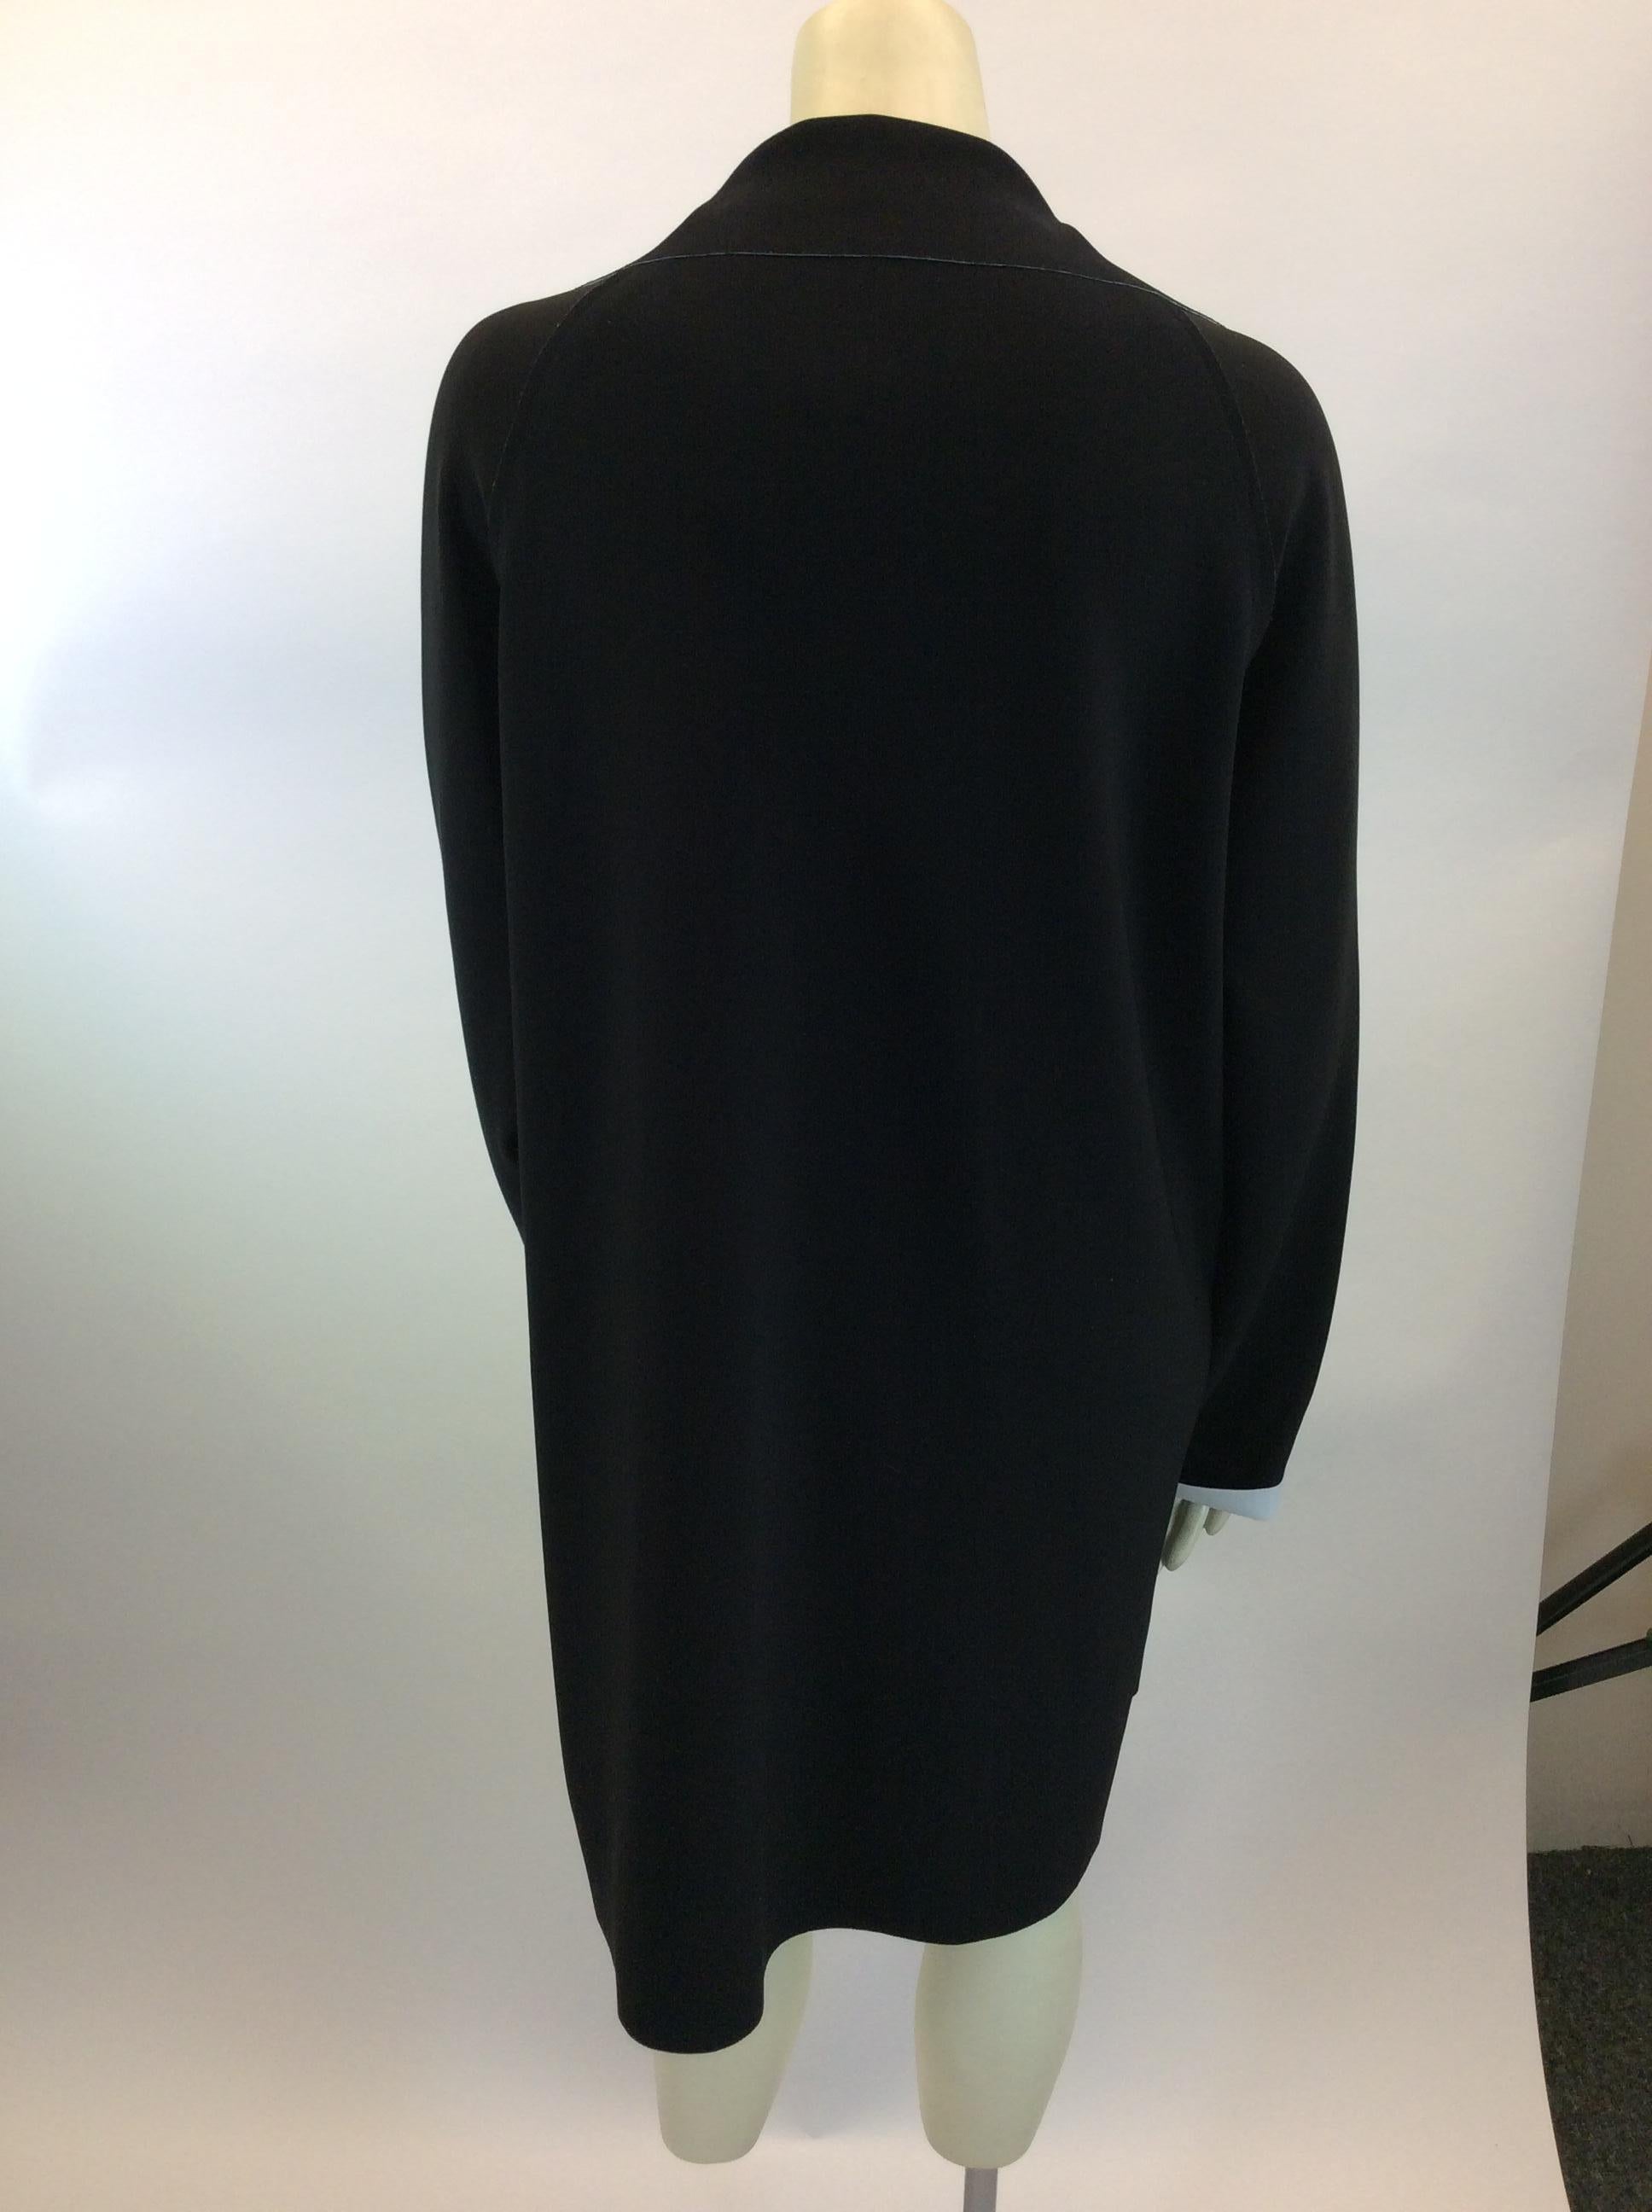 Norma Kamali Black and White Jacket In Good Condition For Sale In Narberth, PA